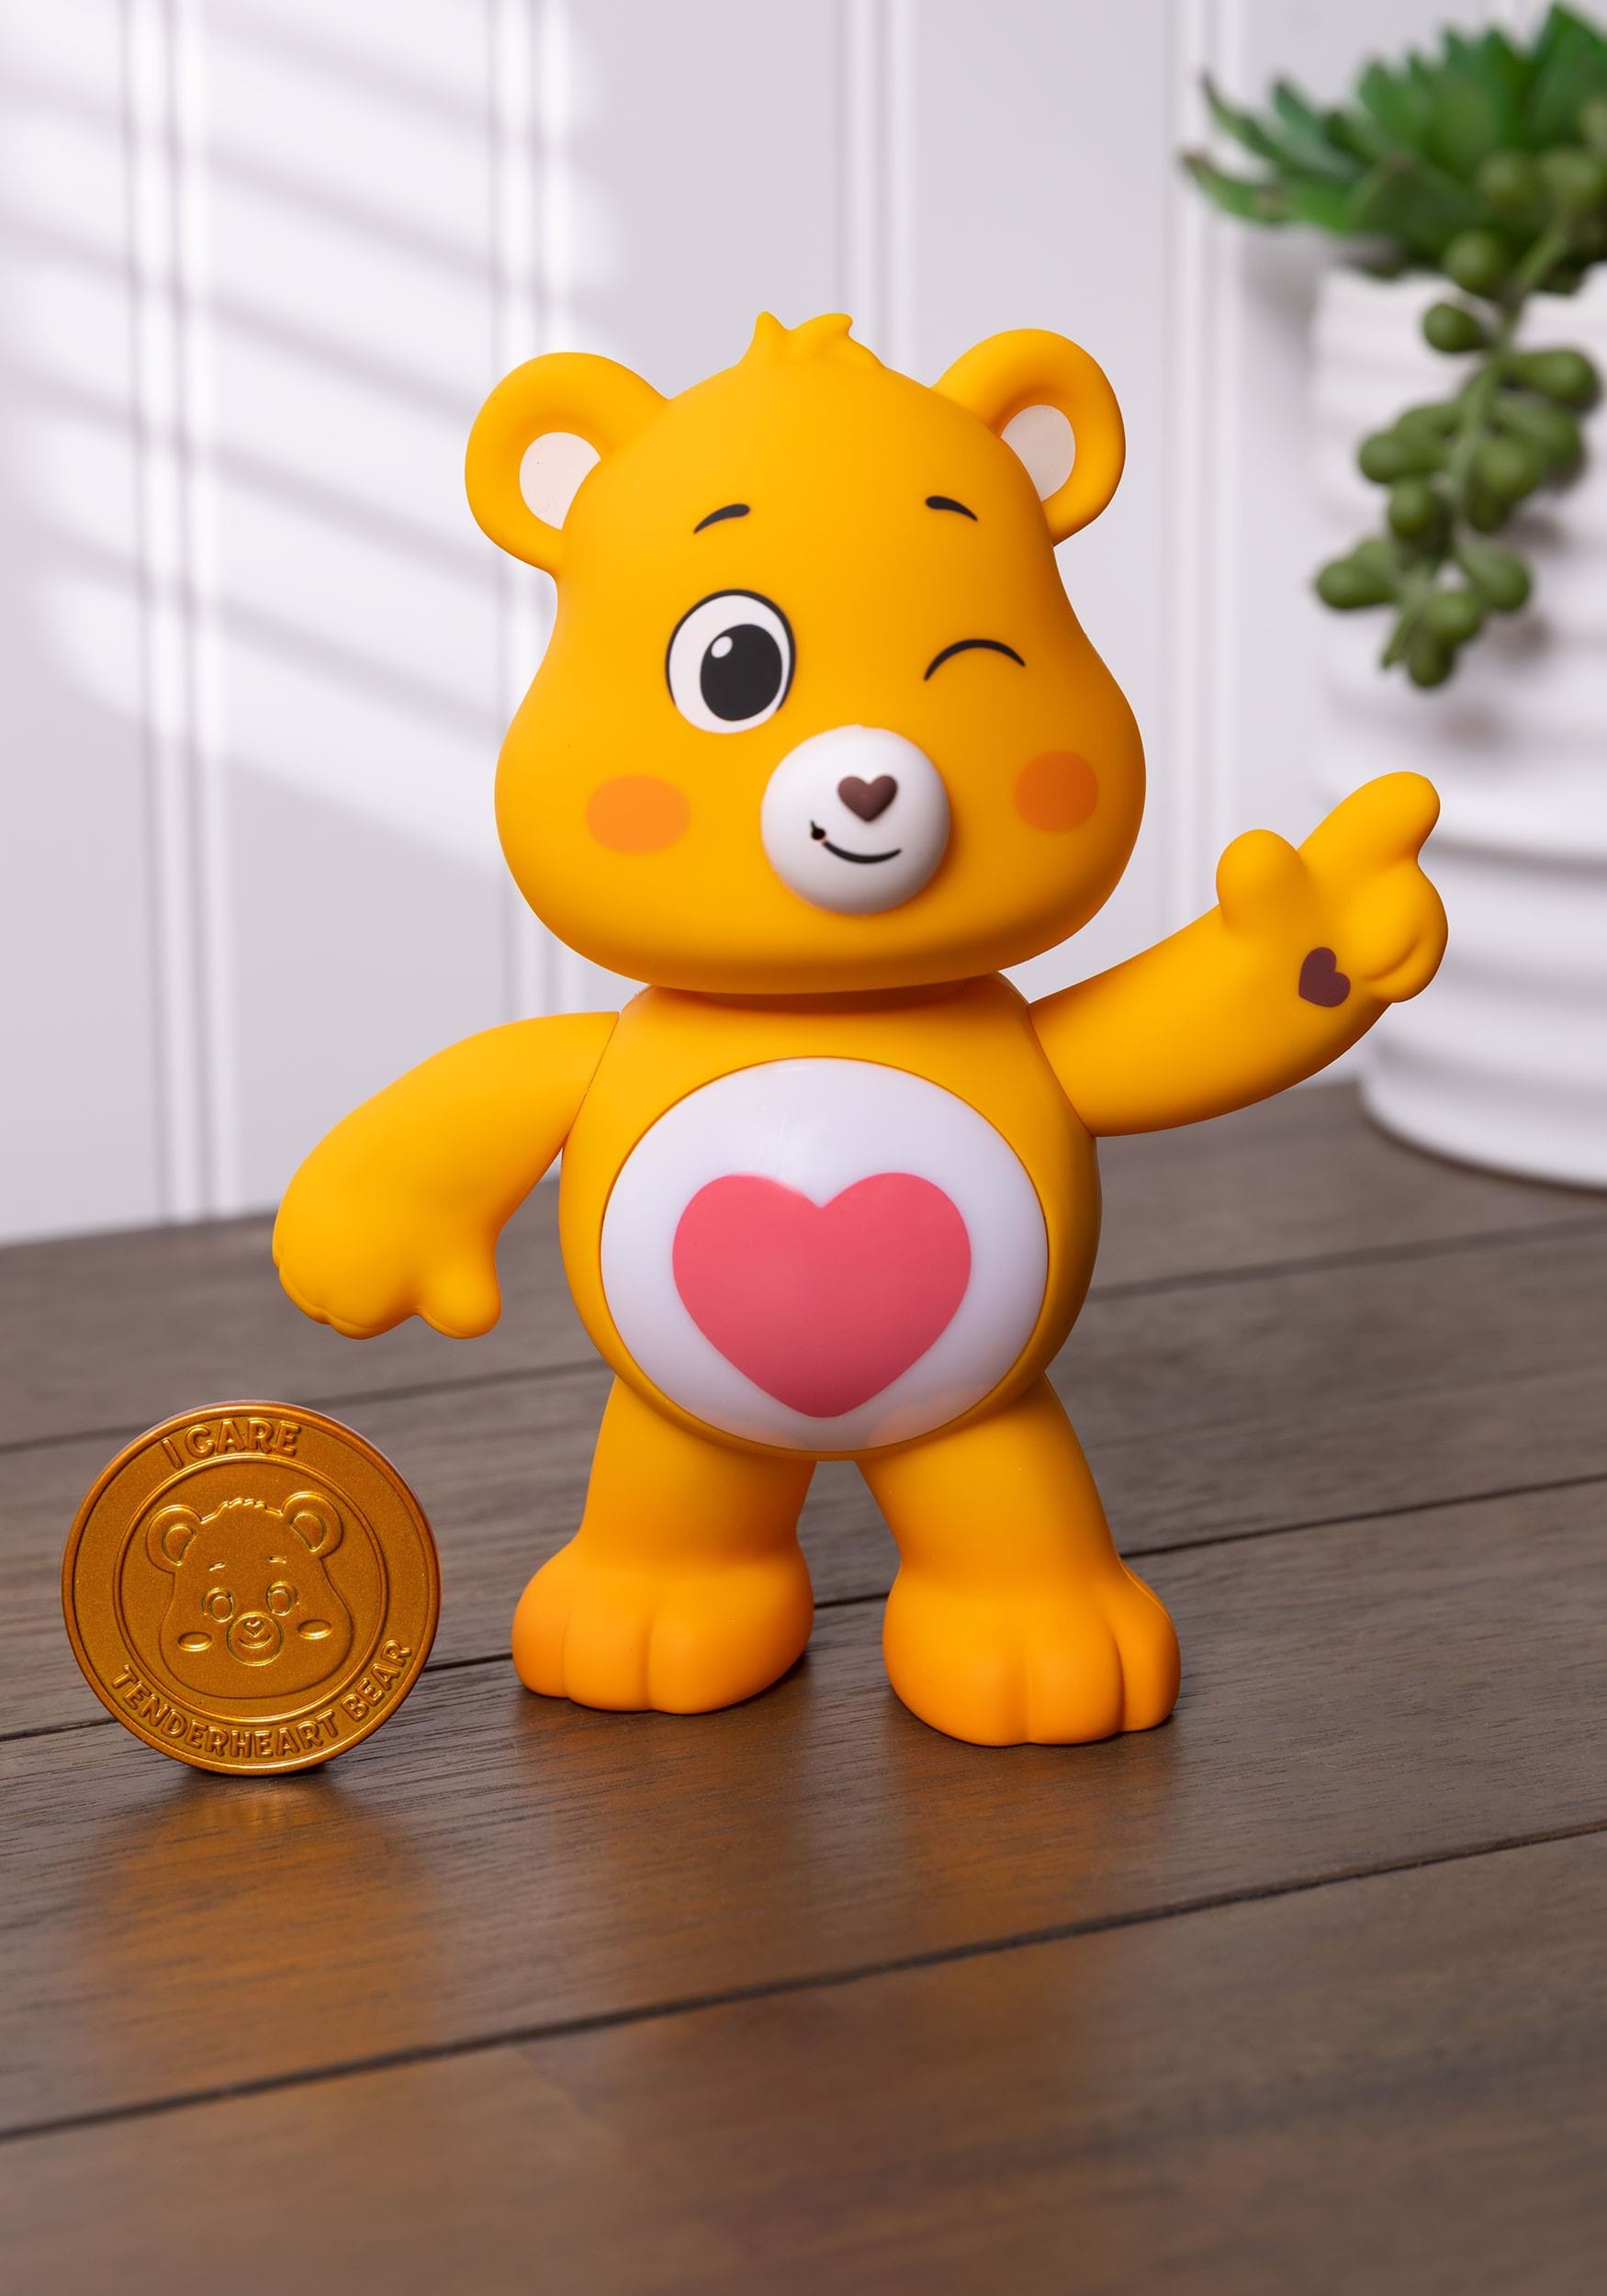 Care Bears Light Up Tender Heart Collectible Figure